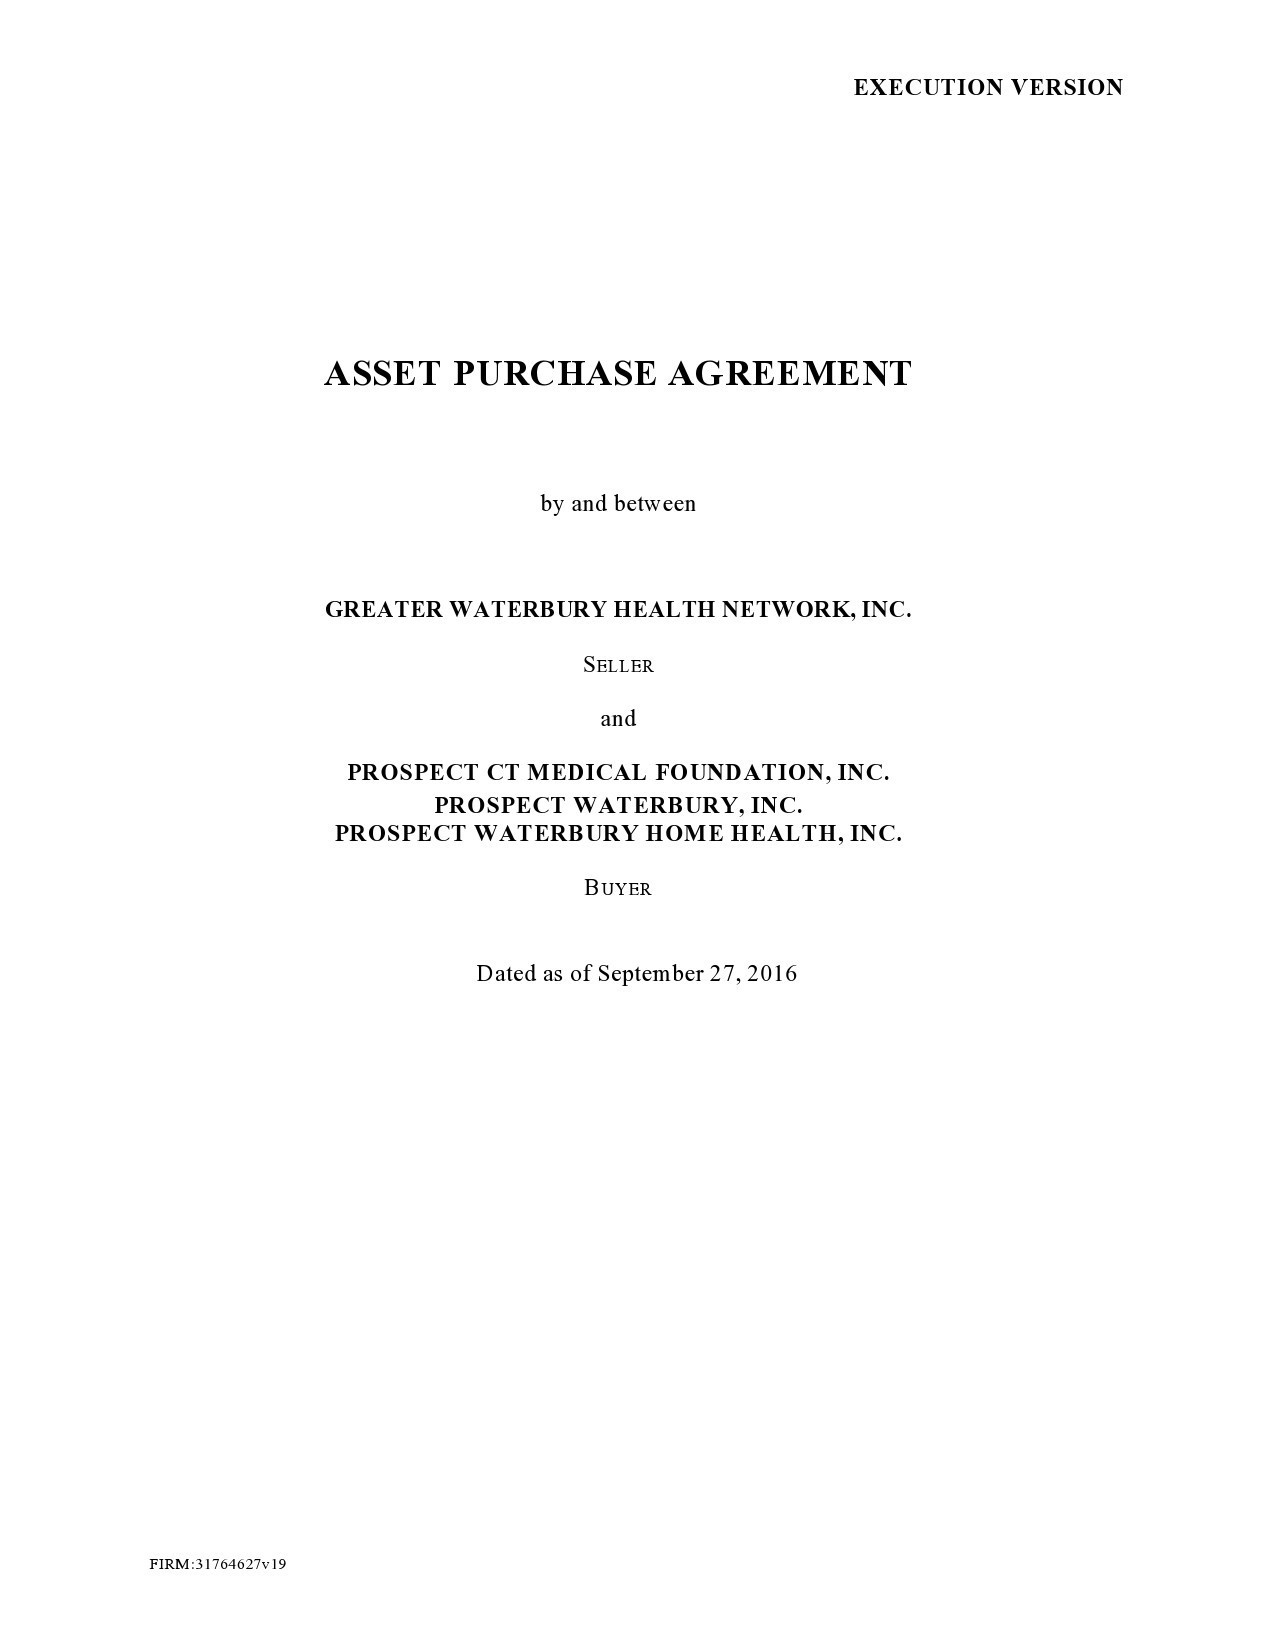 Free asset purchase agreement 33